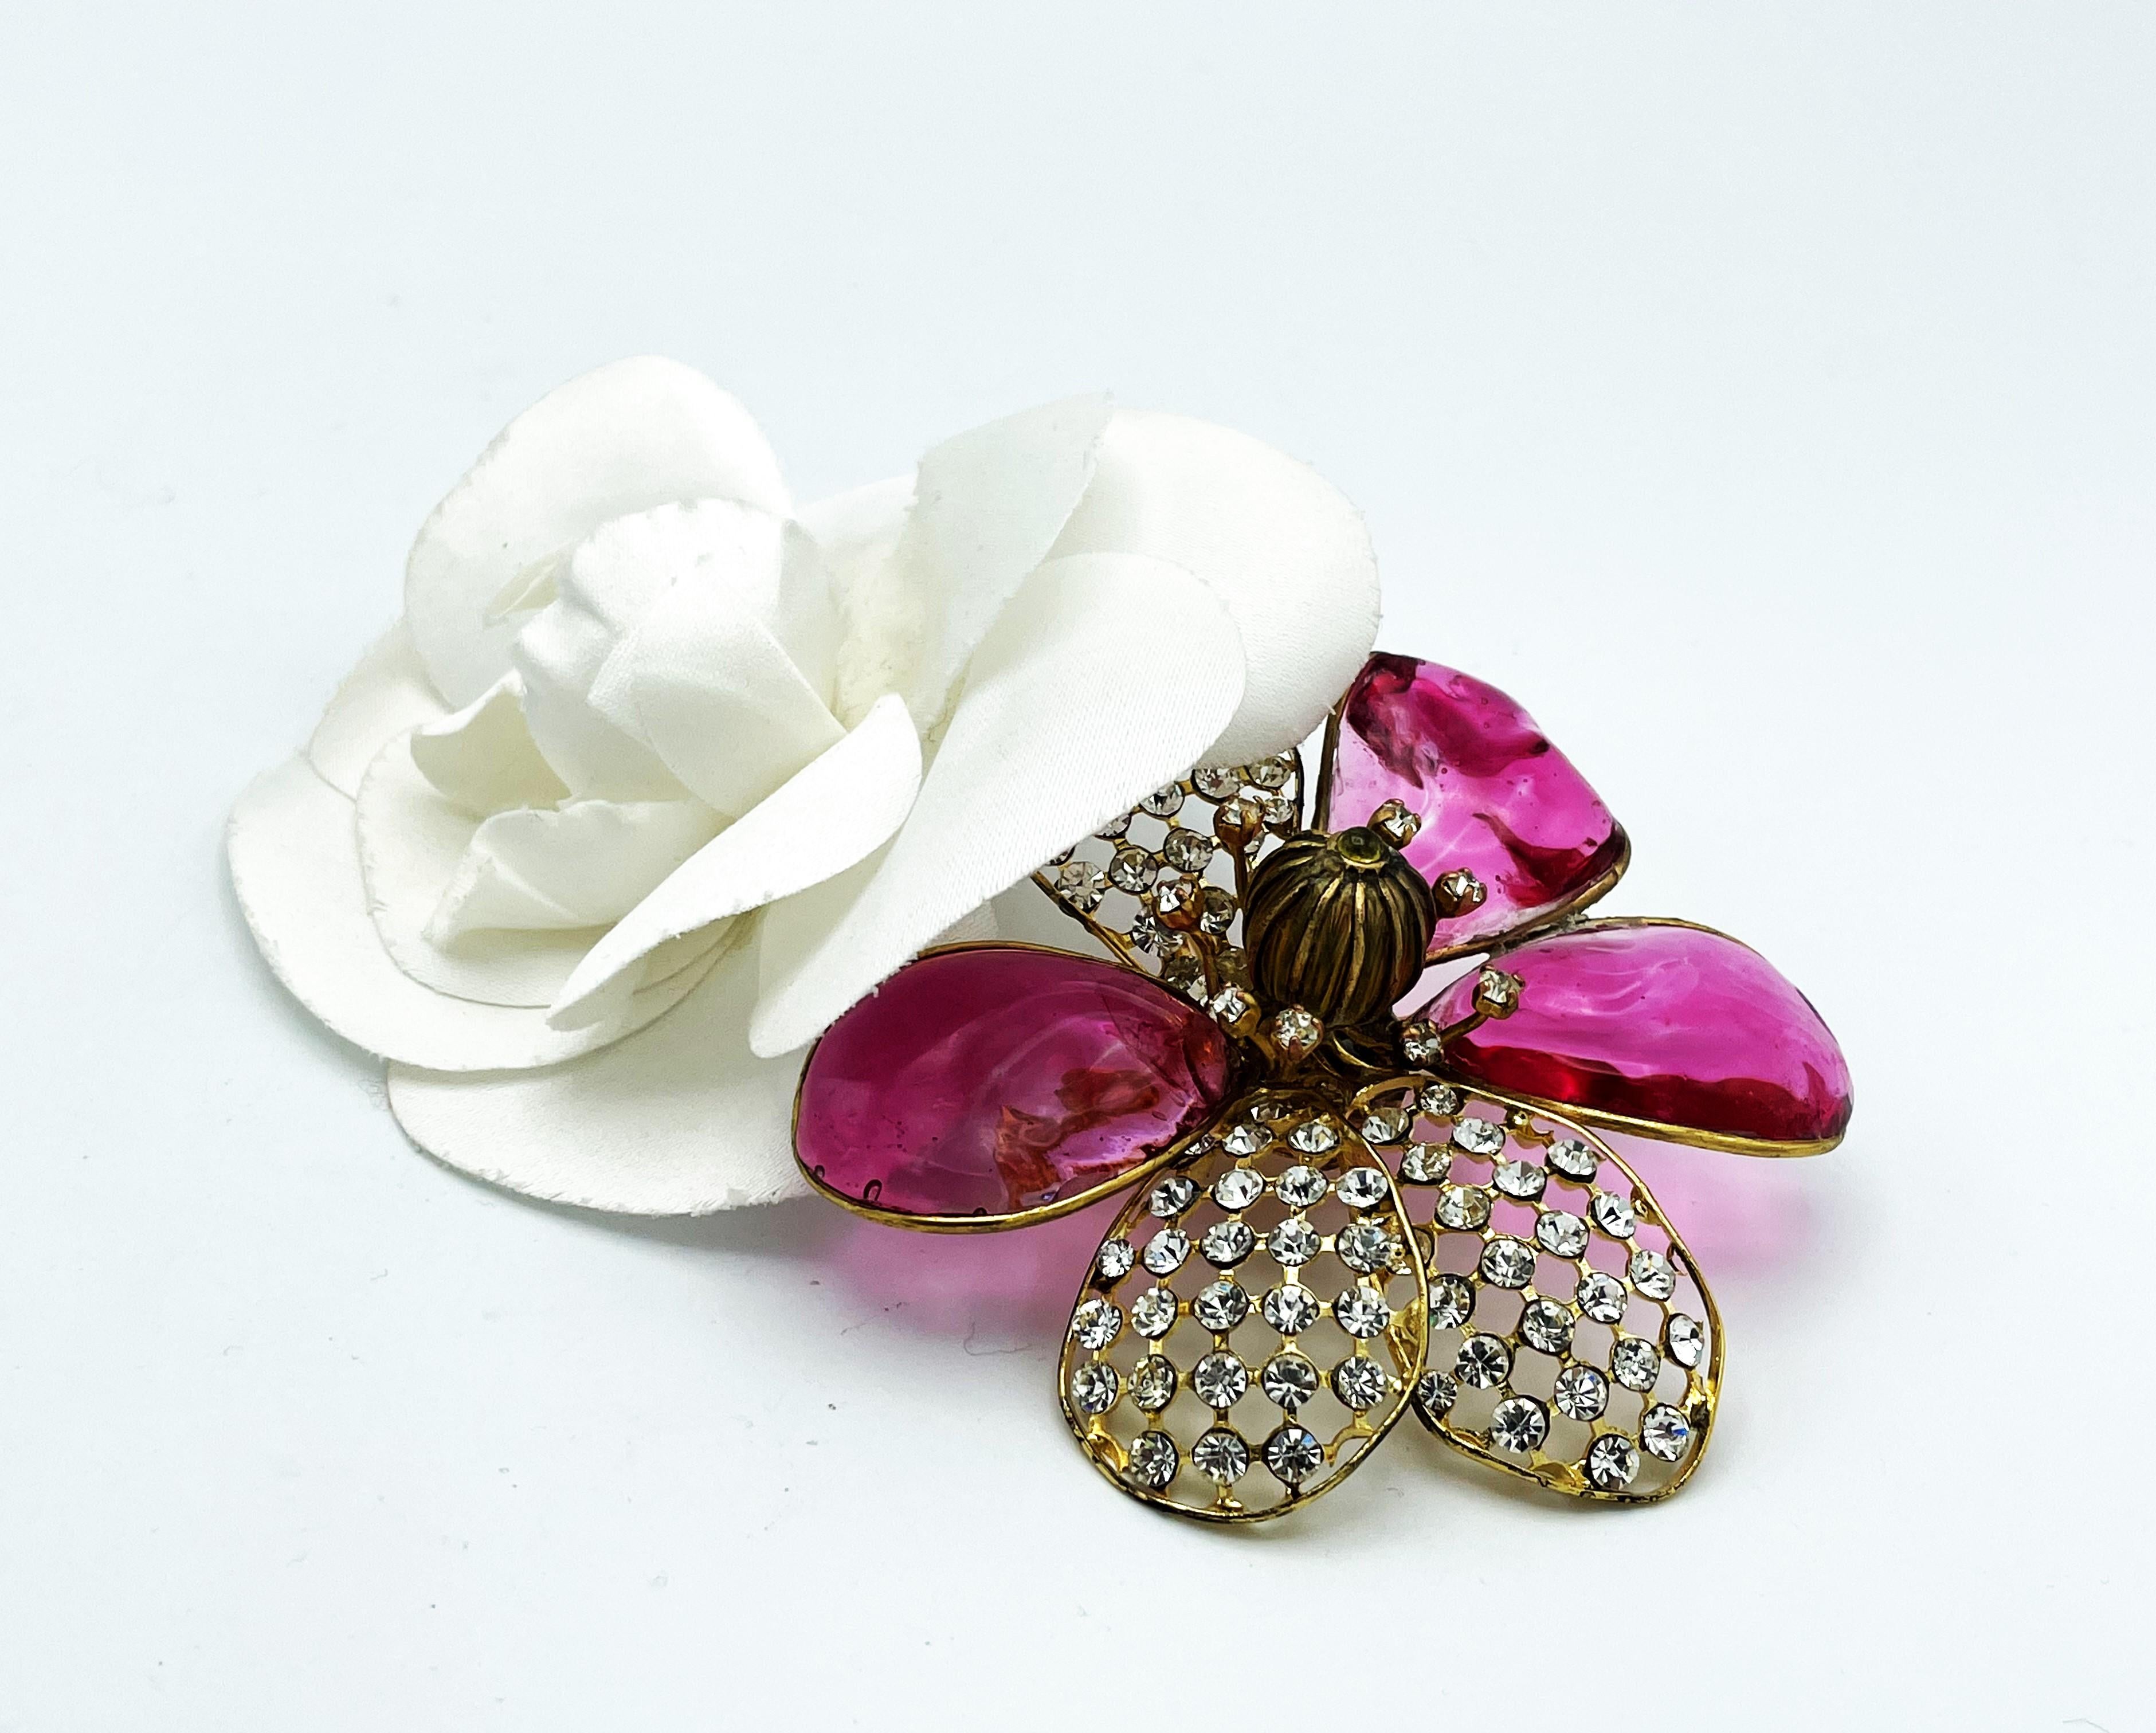 HEYDAY - THE BROOCH CELEBRATES HER COMEBACK AND MAKES OUTFITS SMILE!
Chanel Camellia flower brooch/pendant by Gripoix in gold metal petals of pink Gripoix glass and rhinestones. A very extraordinary CHANEL brooch from the 1990s. Coco Chanel's